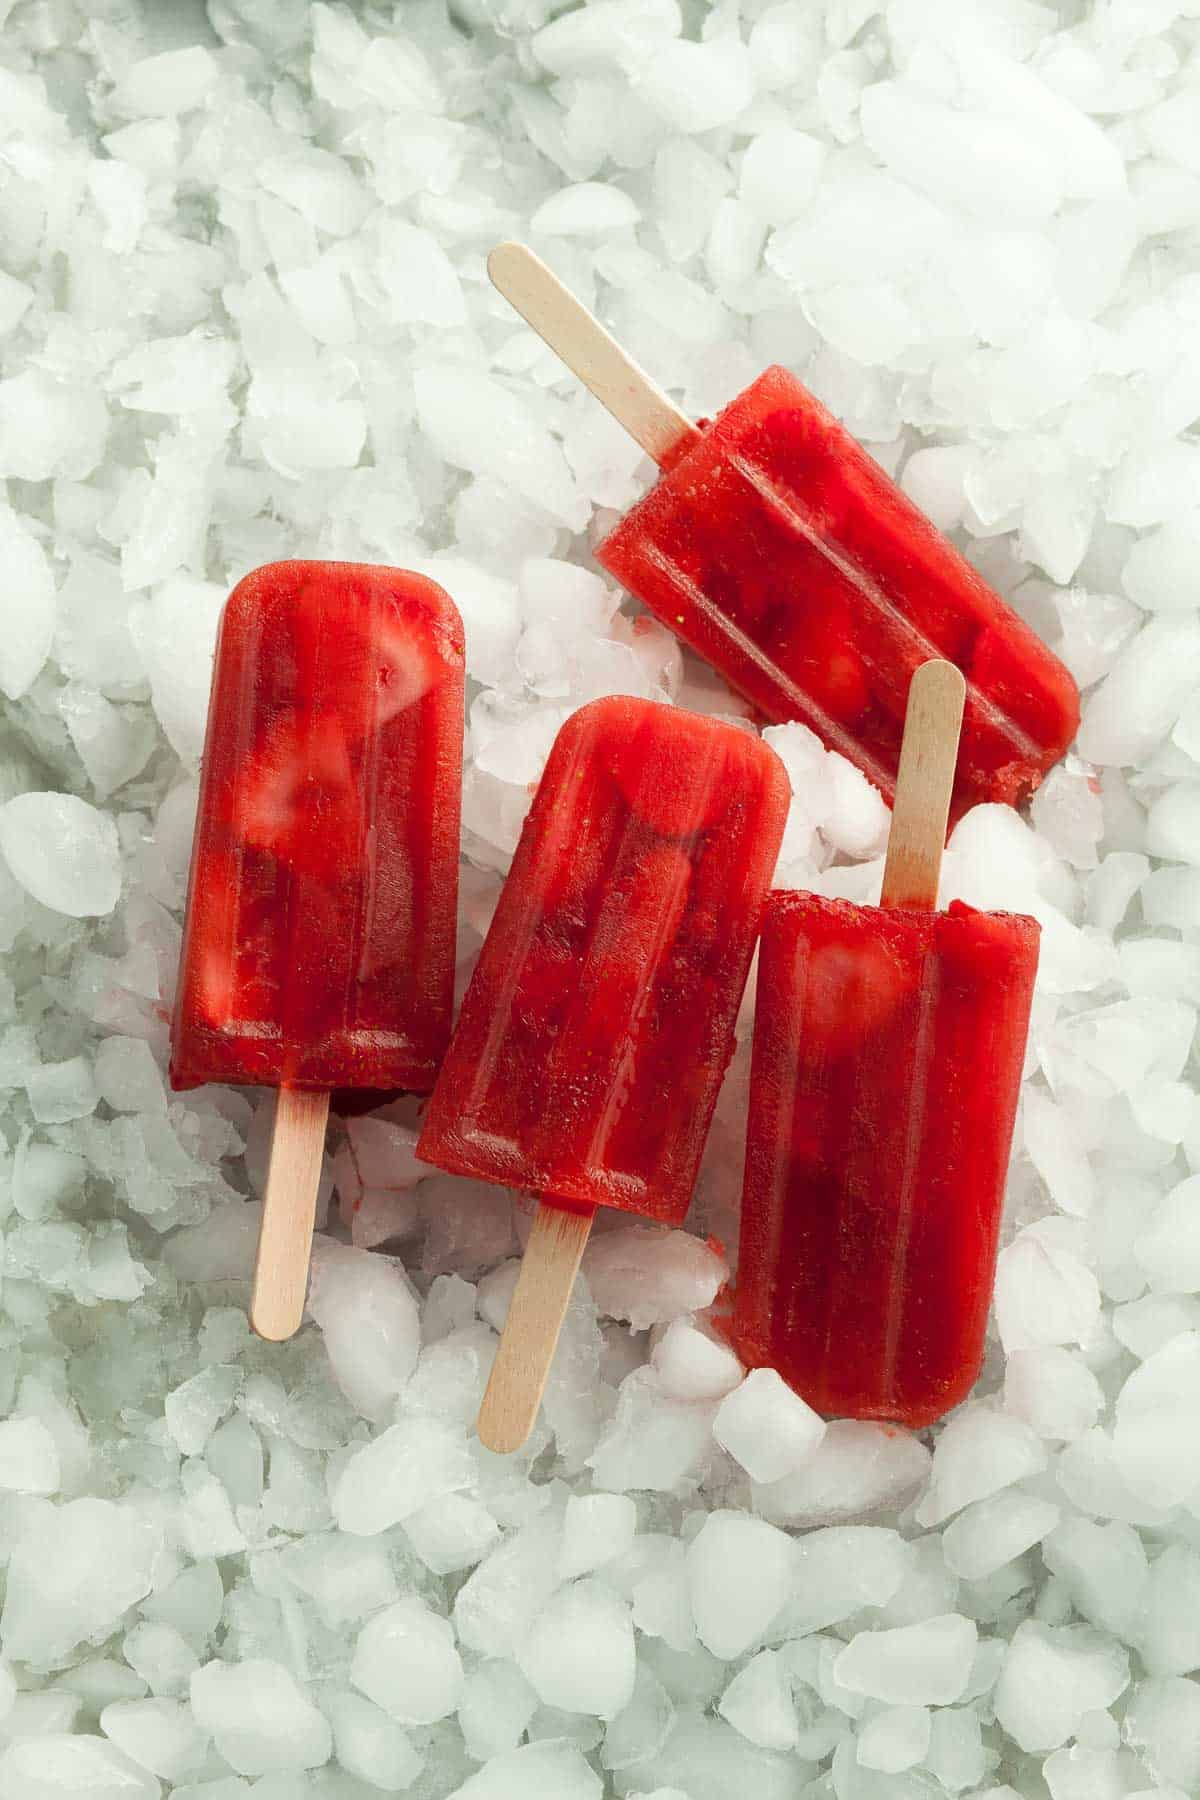 Frozen Fruit Popsicles on Bed of Ice